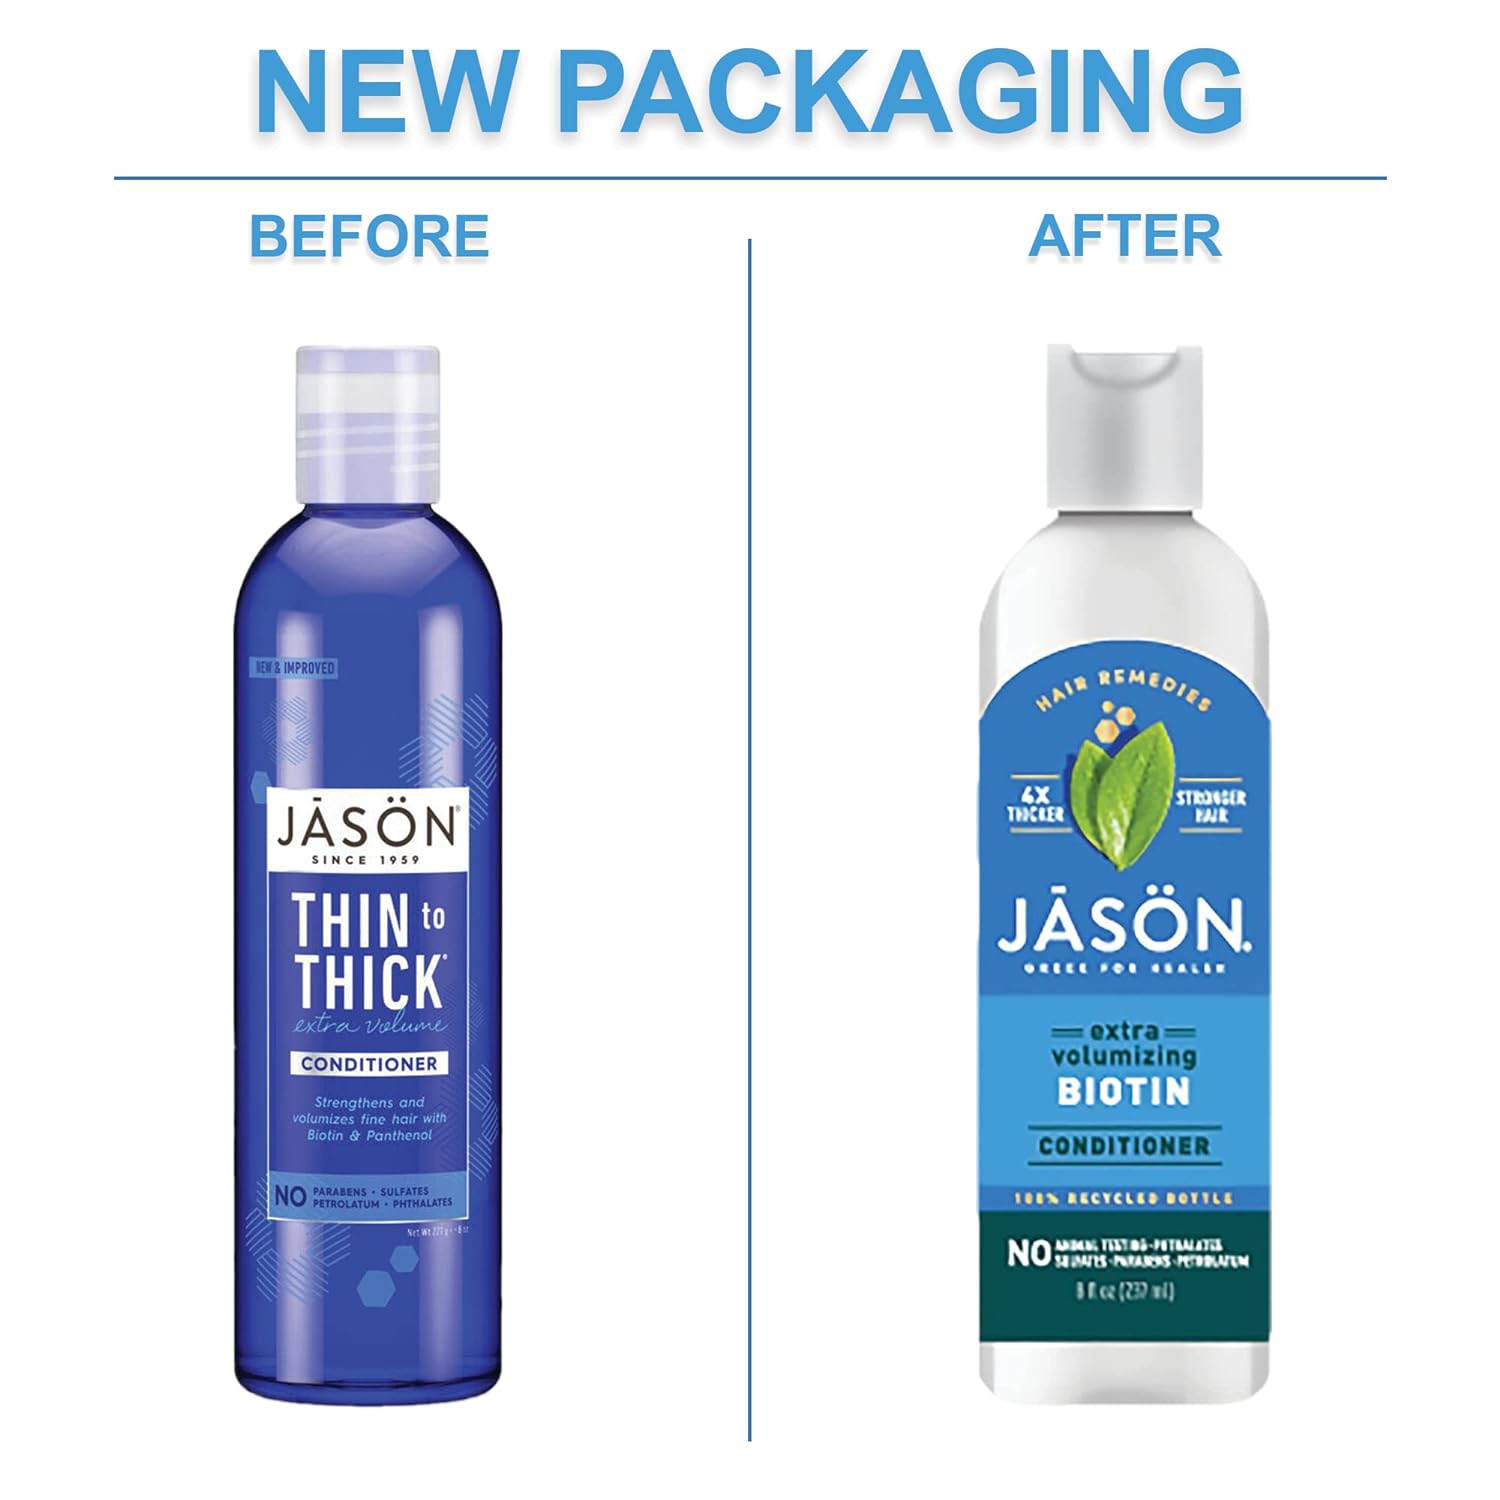 Jason Conditioner, Thin to Thick Extra Volume, 8 Oz : Standard Hair Conditioners : Beauty & Personal Care